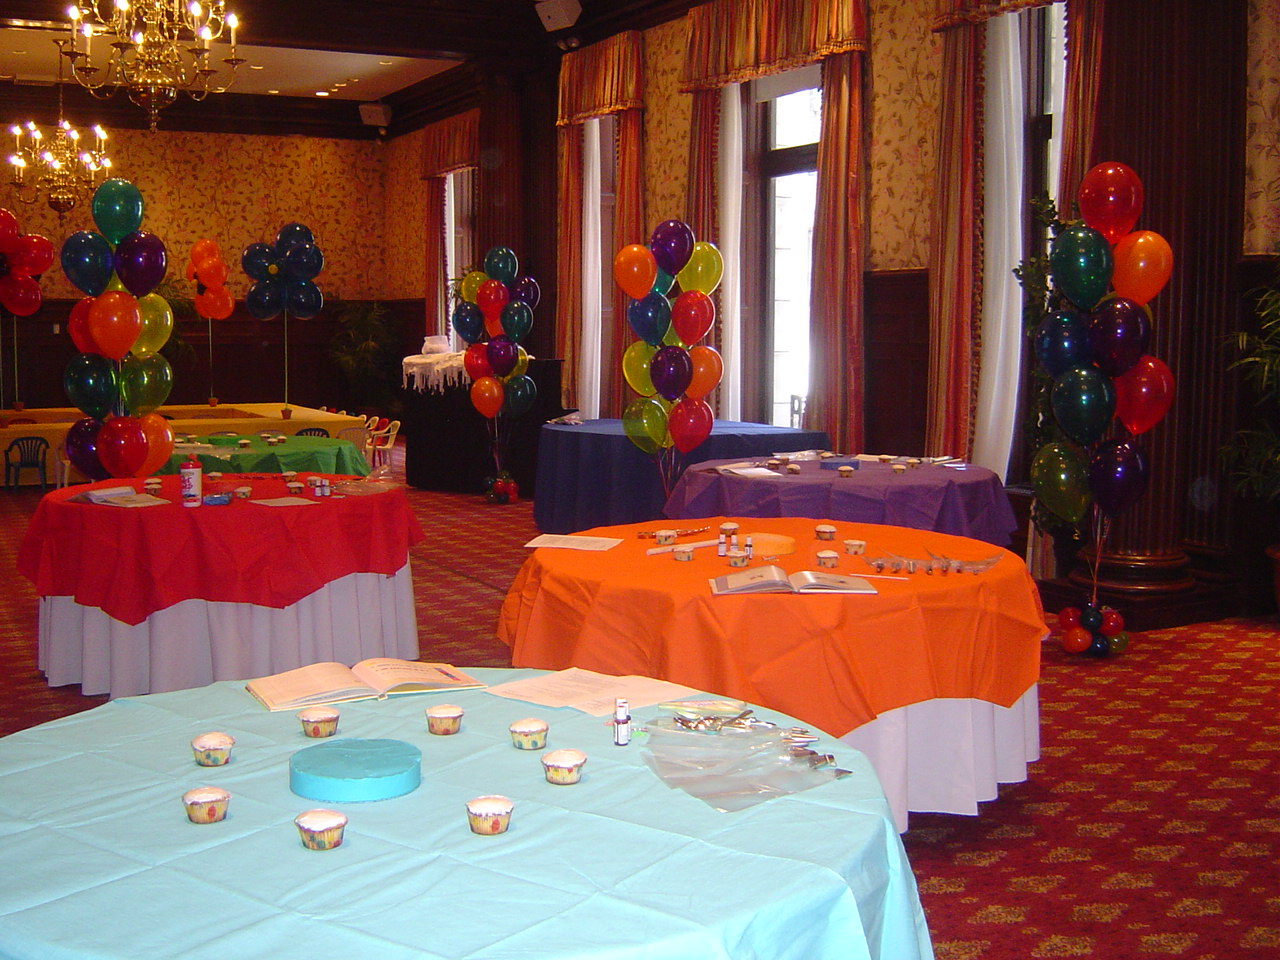 The long banquet tables in the decorating table